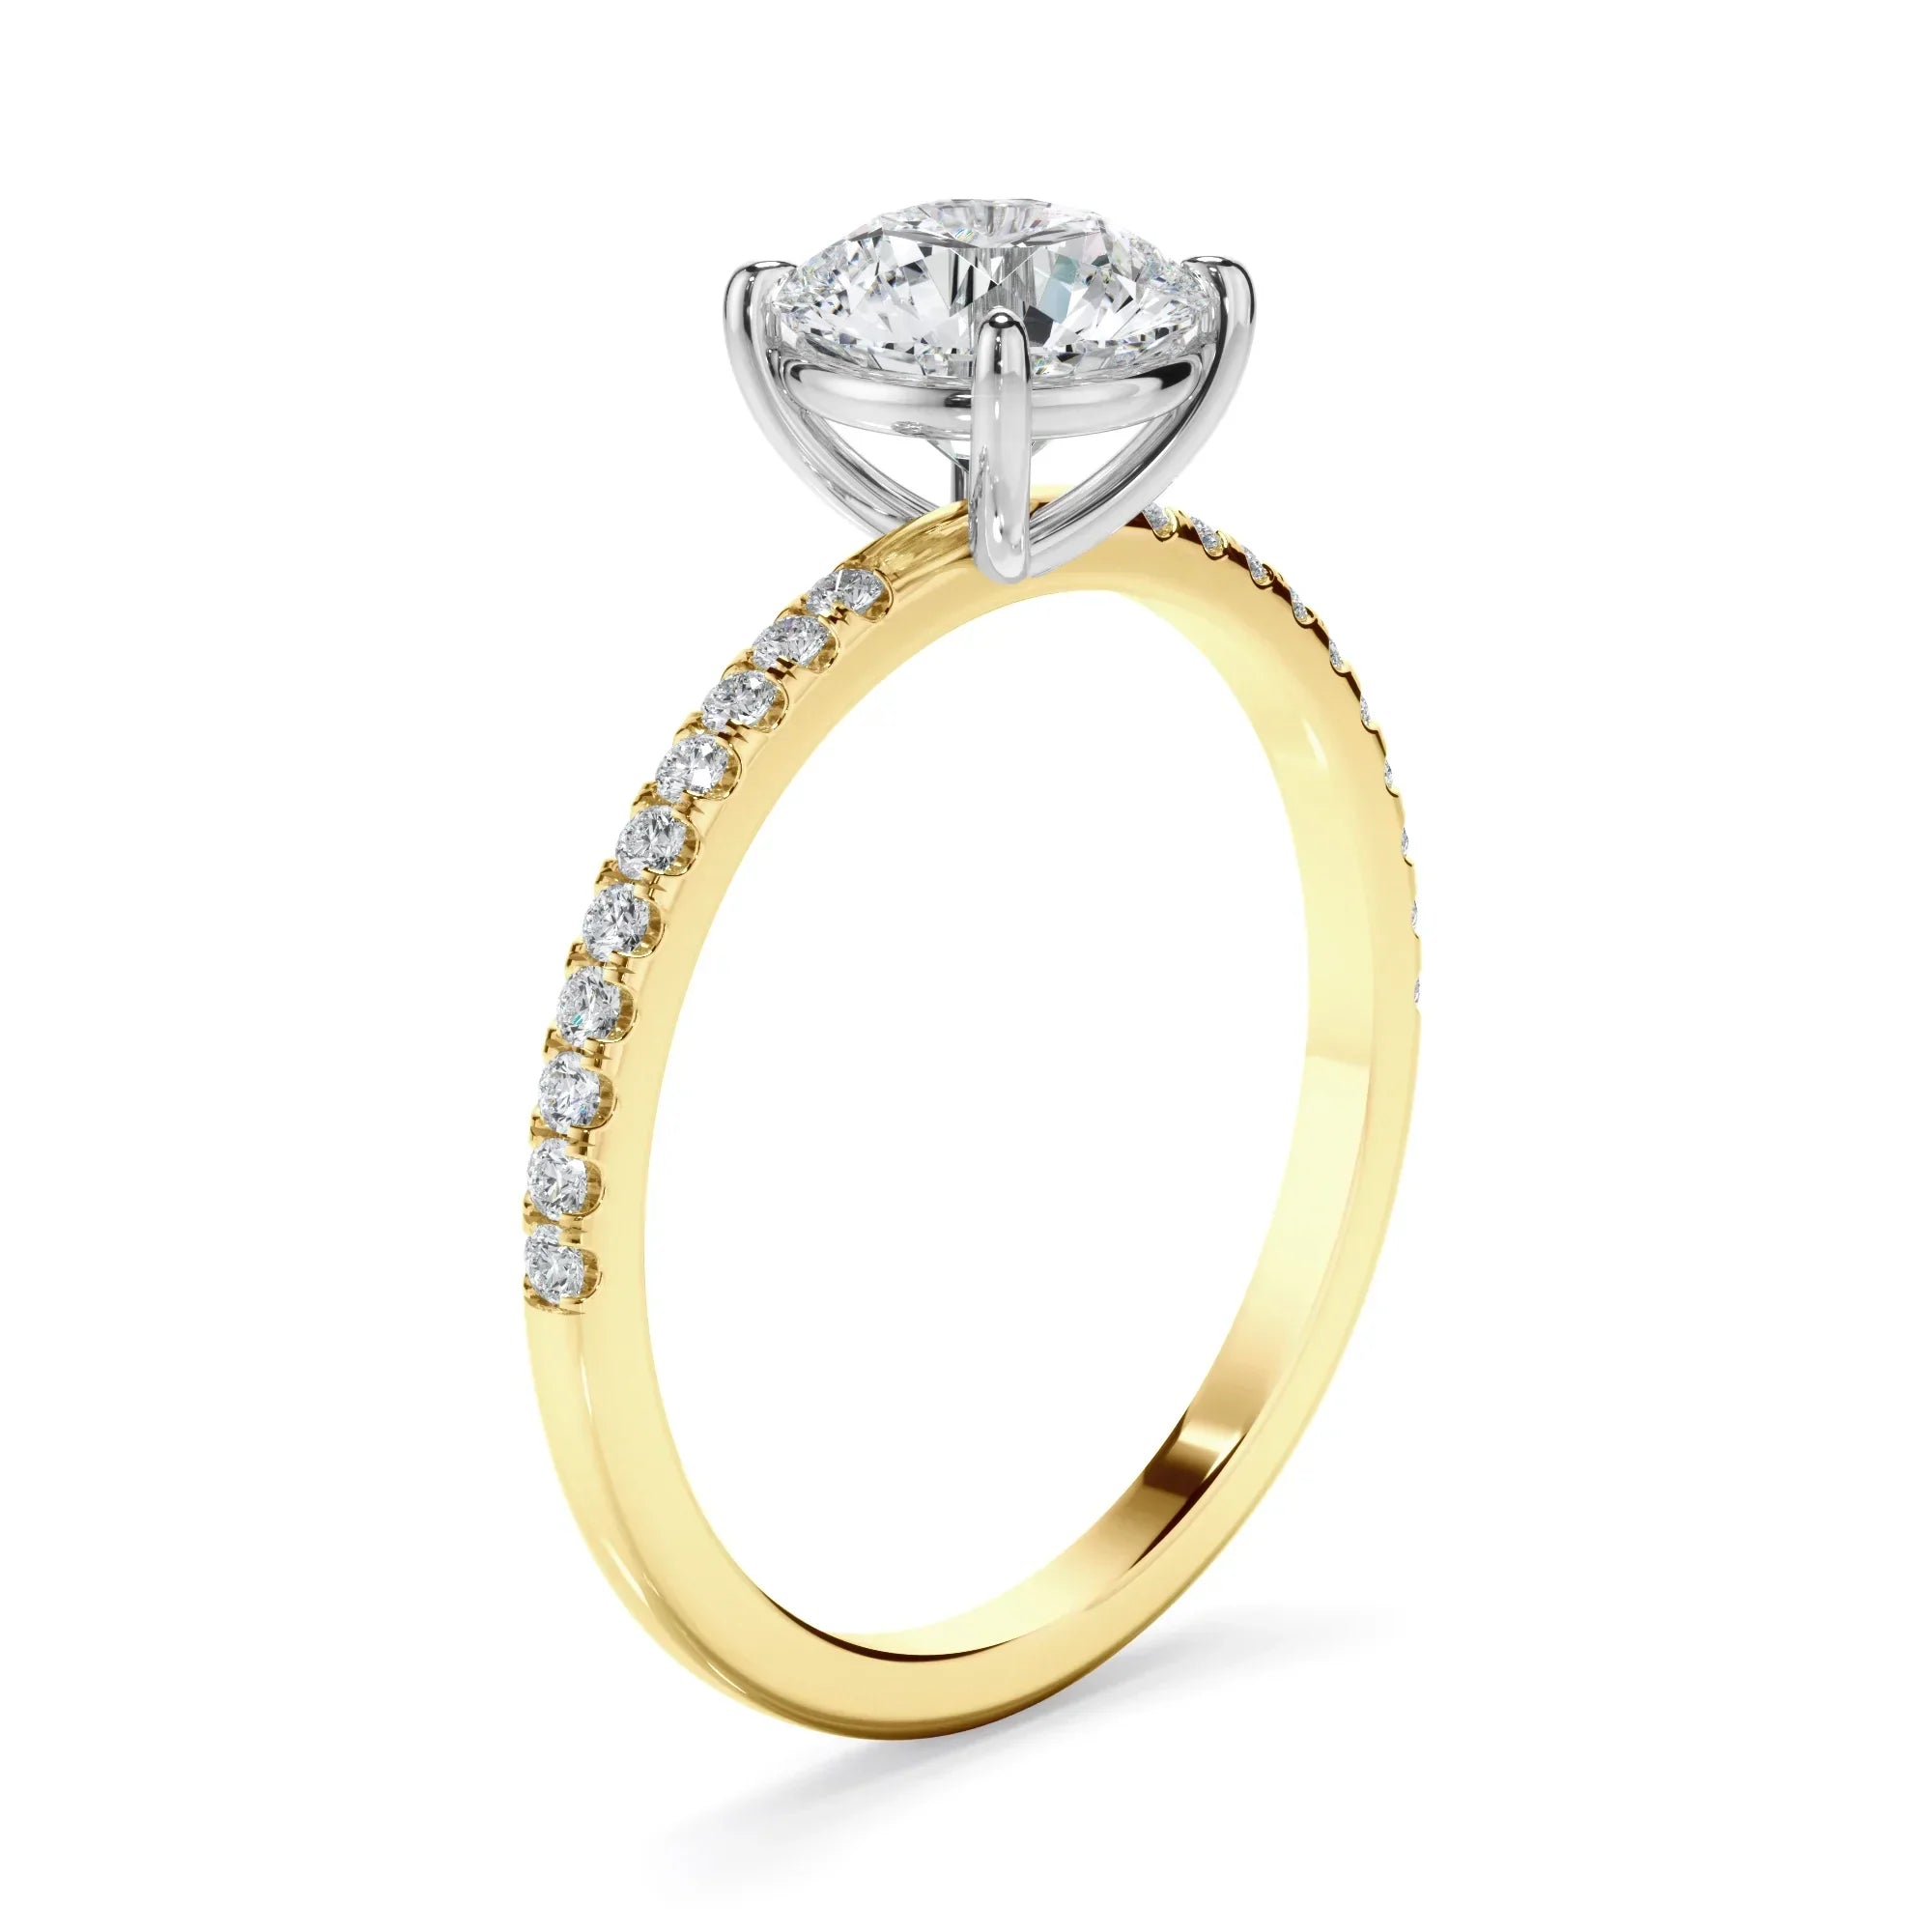 Round Brilliant Cut Diamond Solitaire Engagement Ring With Pave Band